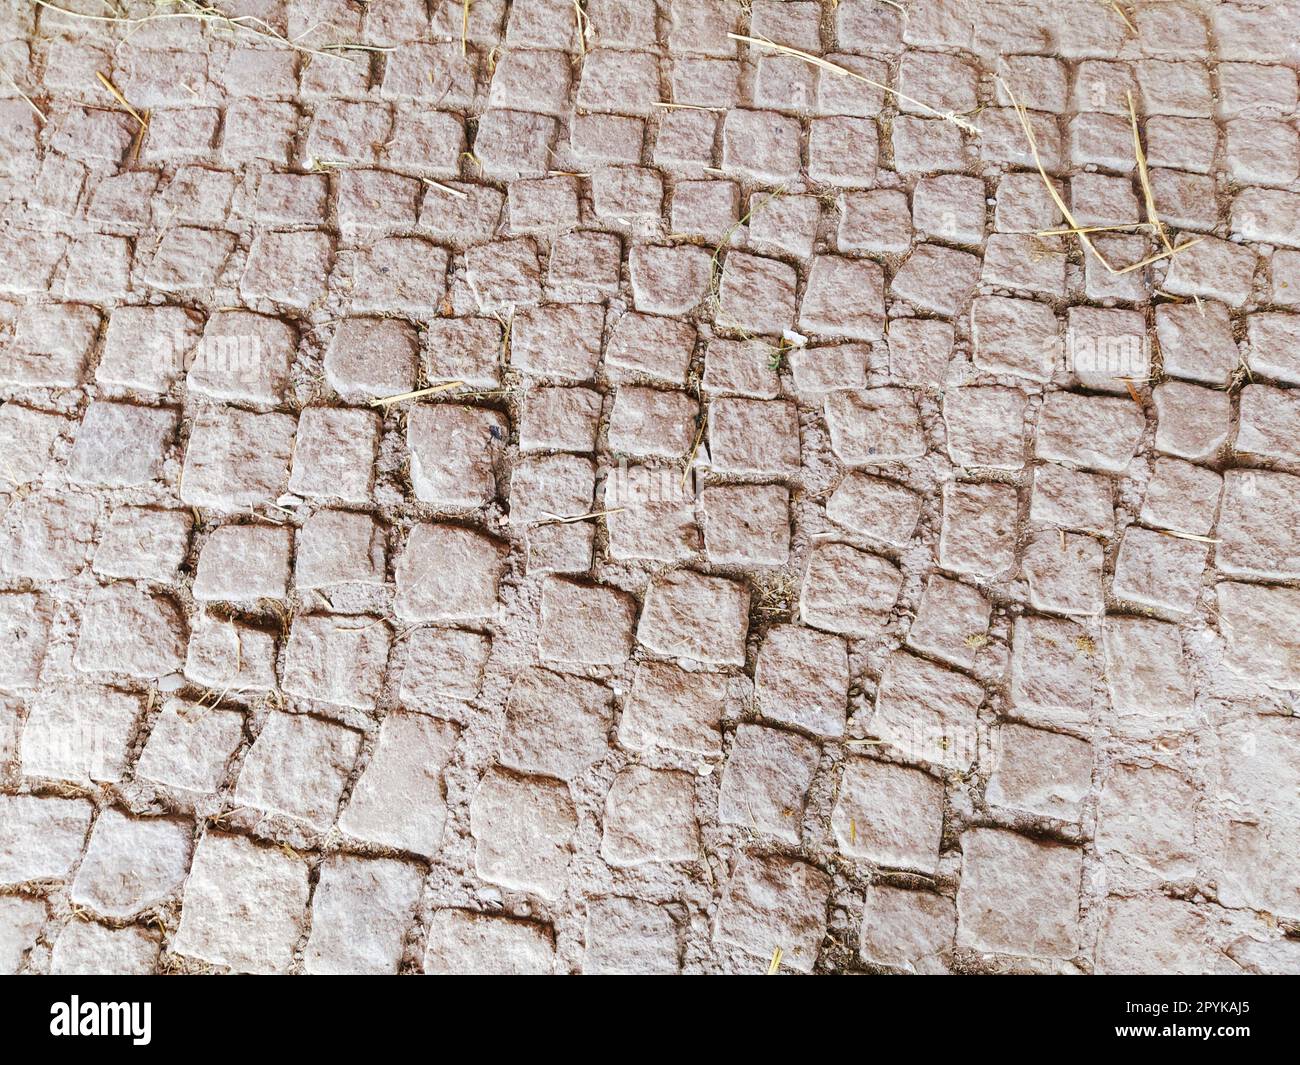 pavement paved with uneven natural stones. Between crushed cobblestones there are small pebbles, earth, sand, grass. Square in the old european city. Brown sepia effect Stock Photo